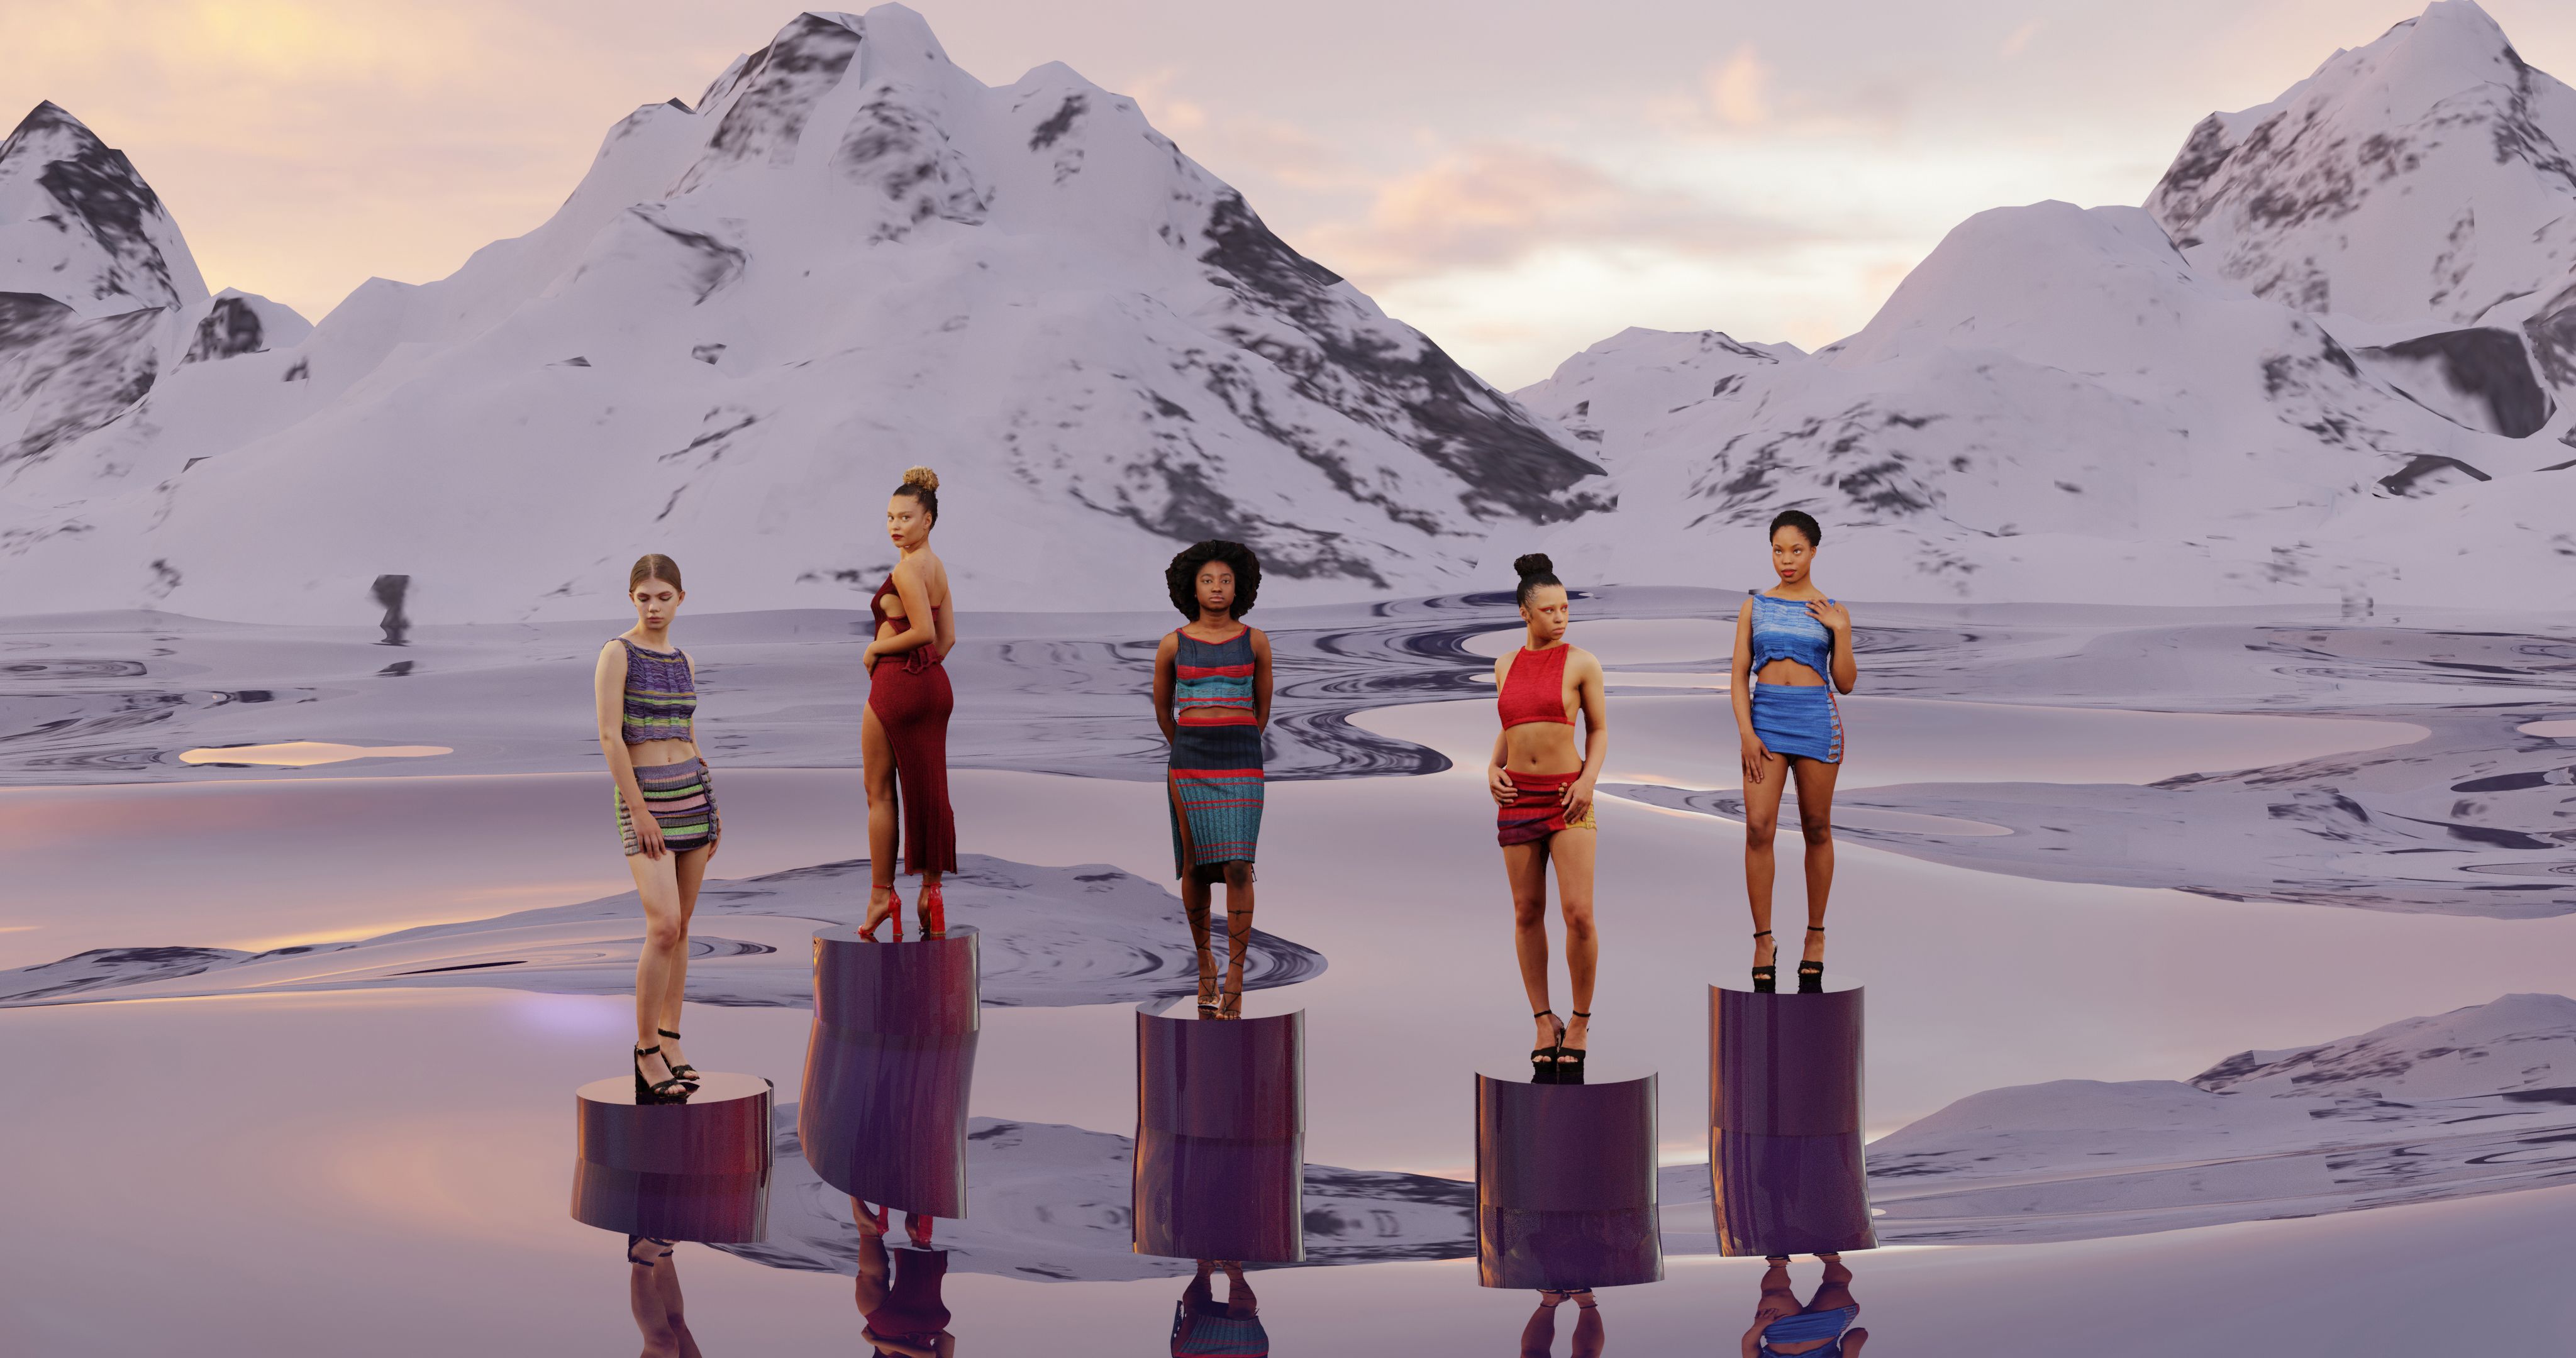 5 models rendered in 3D on circular platforms, backdropped by snowy mountains and a sunset 